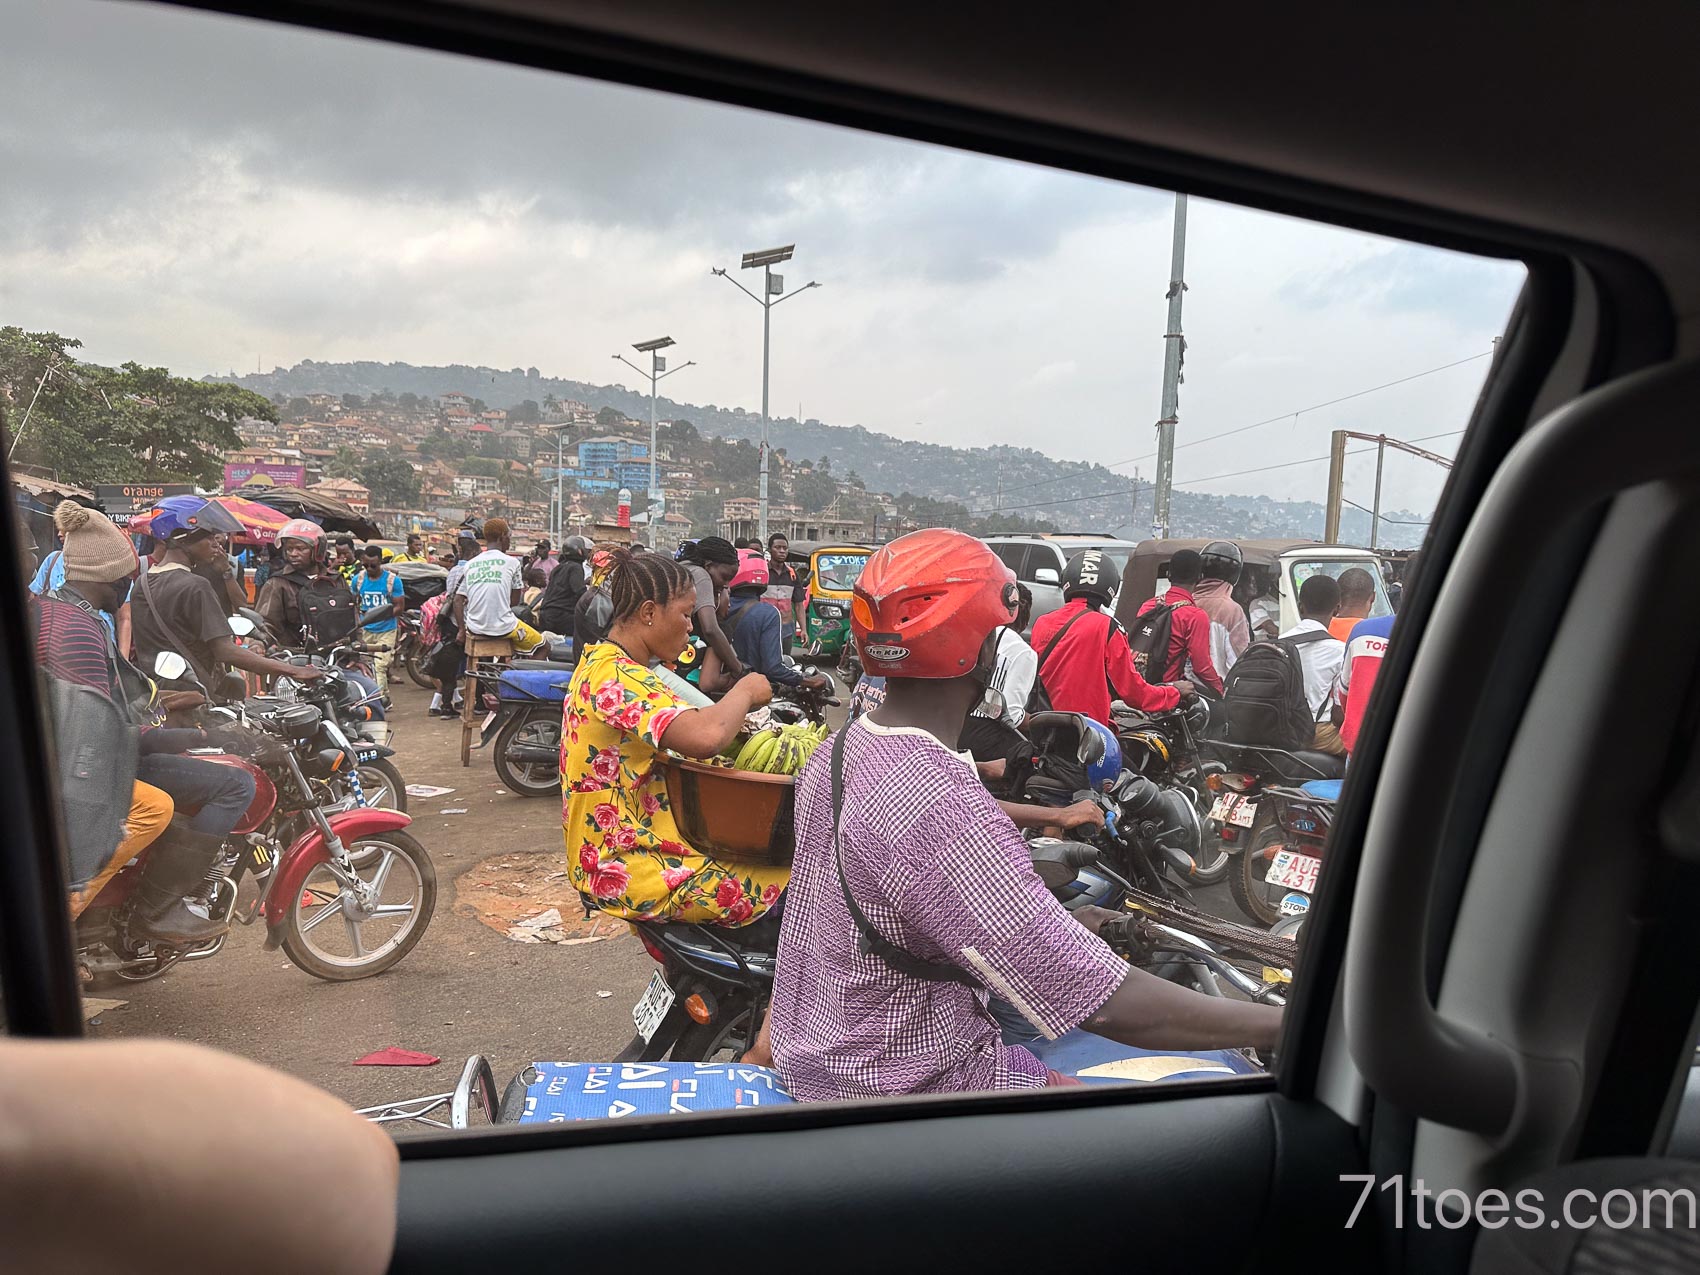 the view from the car window in Sierra Leone